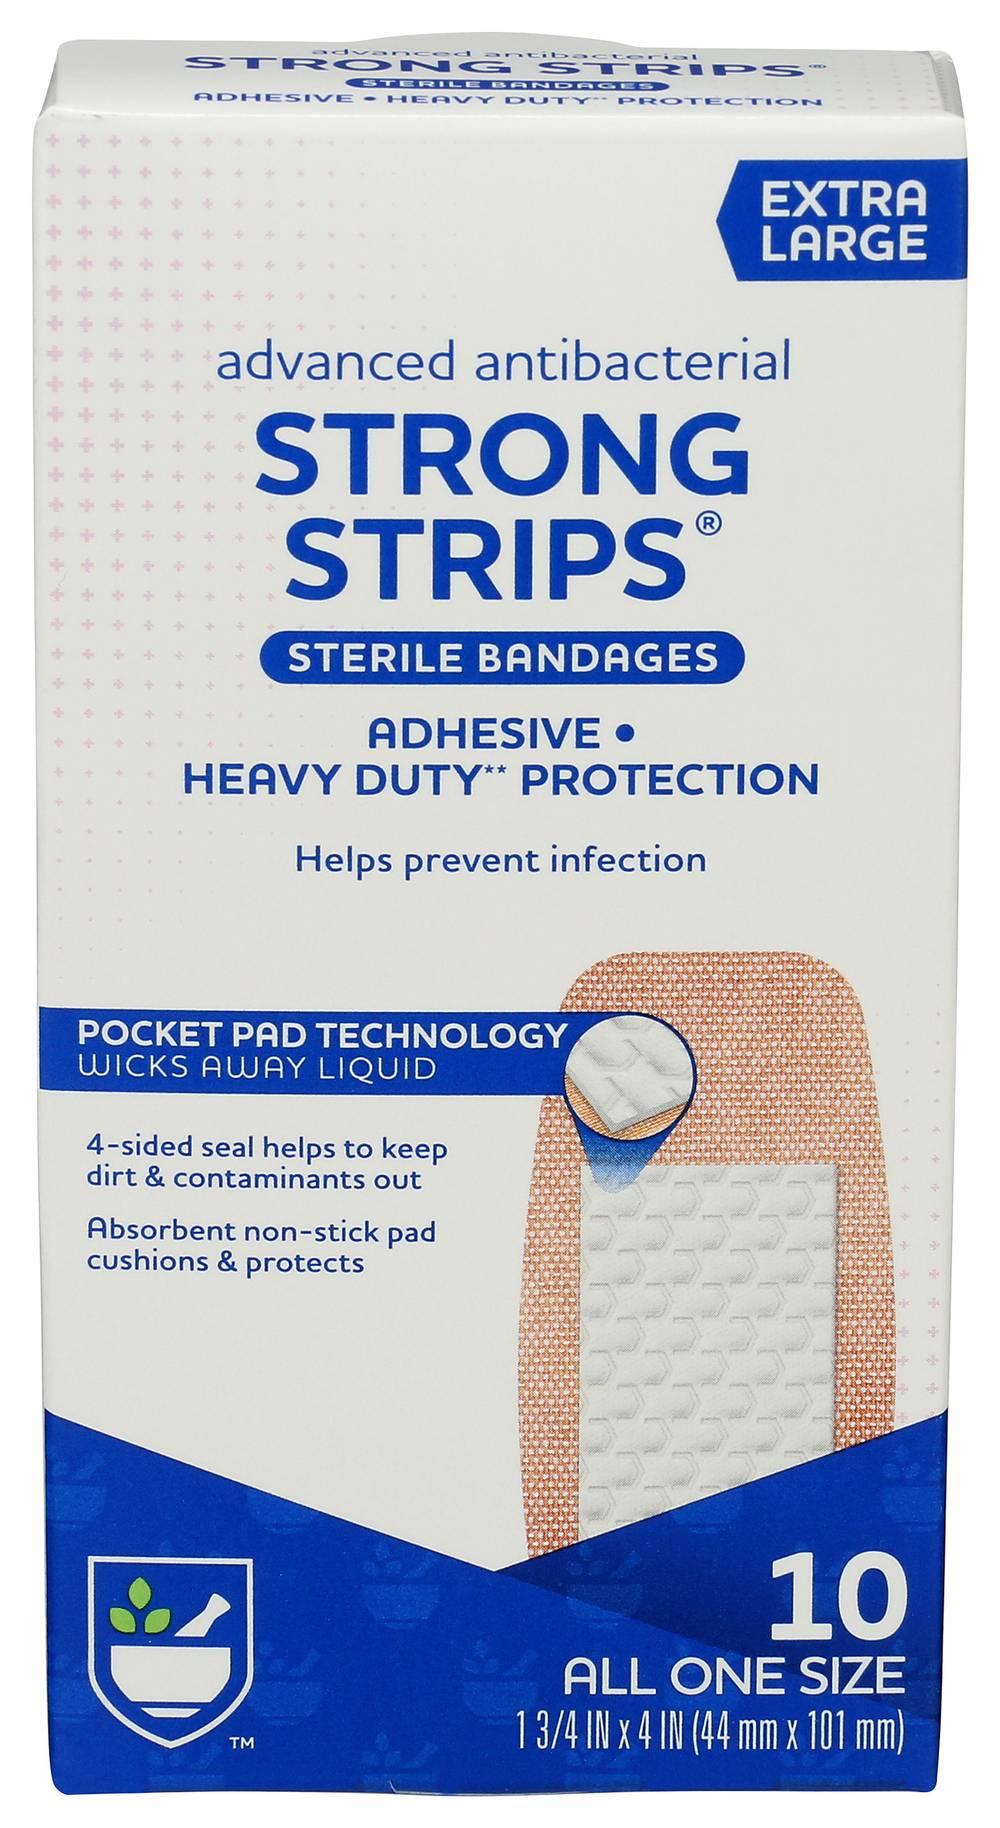 Rite Aid Advanced Antibacterial Strong Strips Adhesive Bandages Extra Large (10 ct)